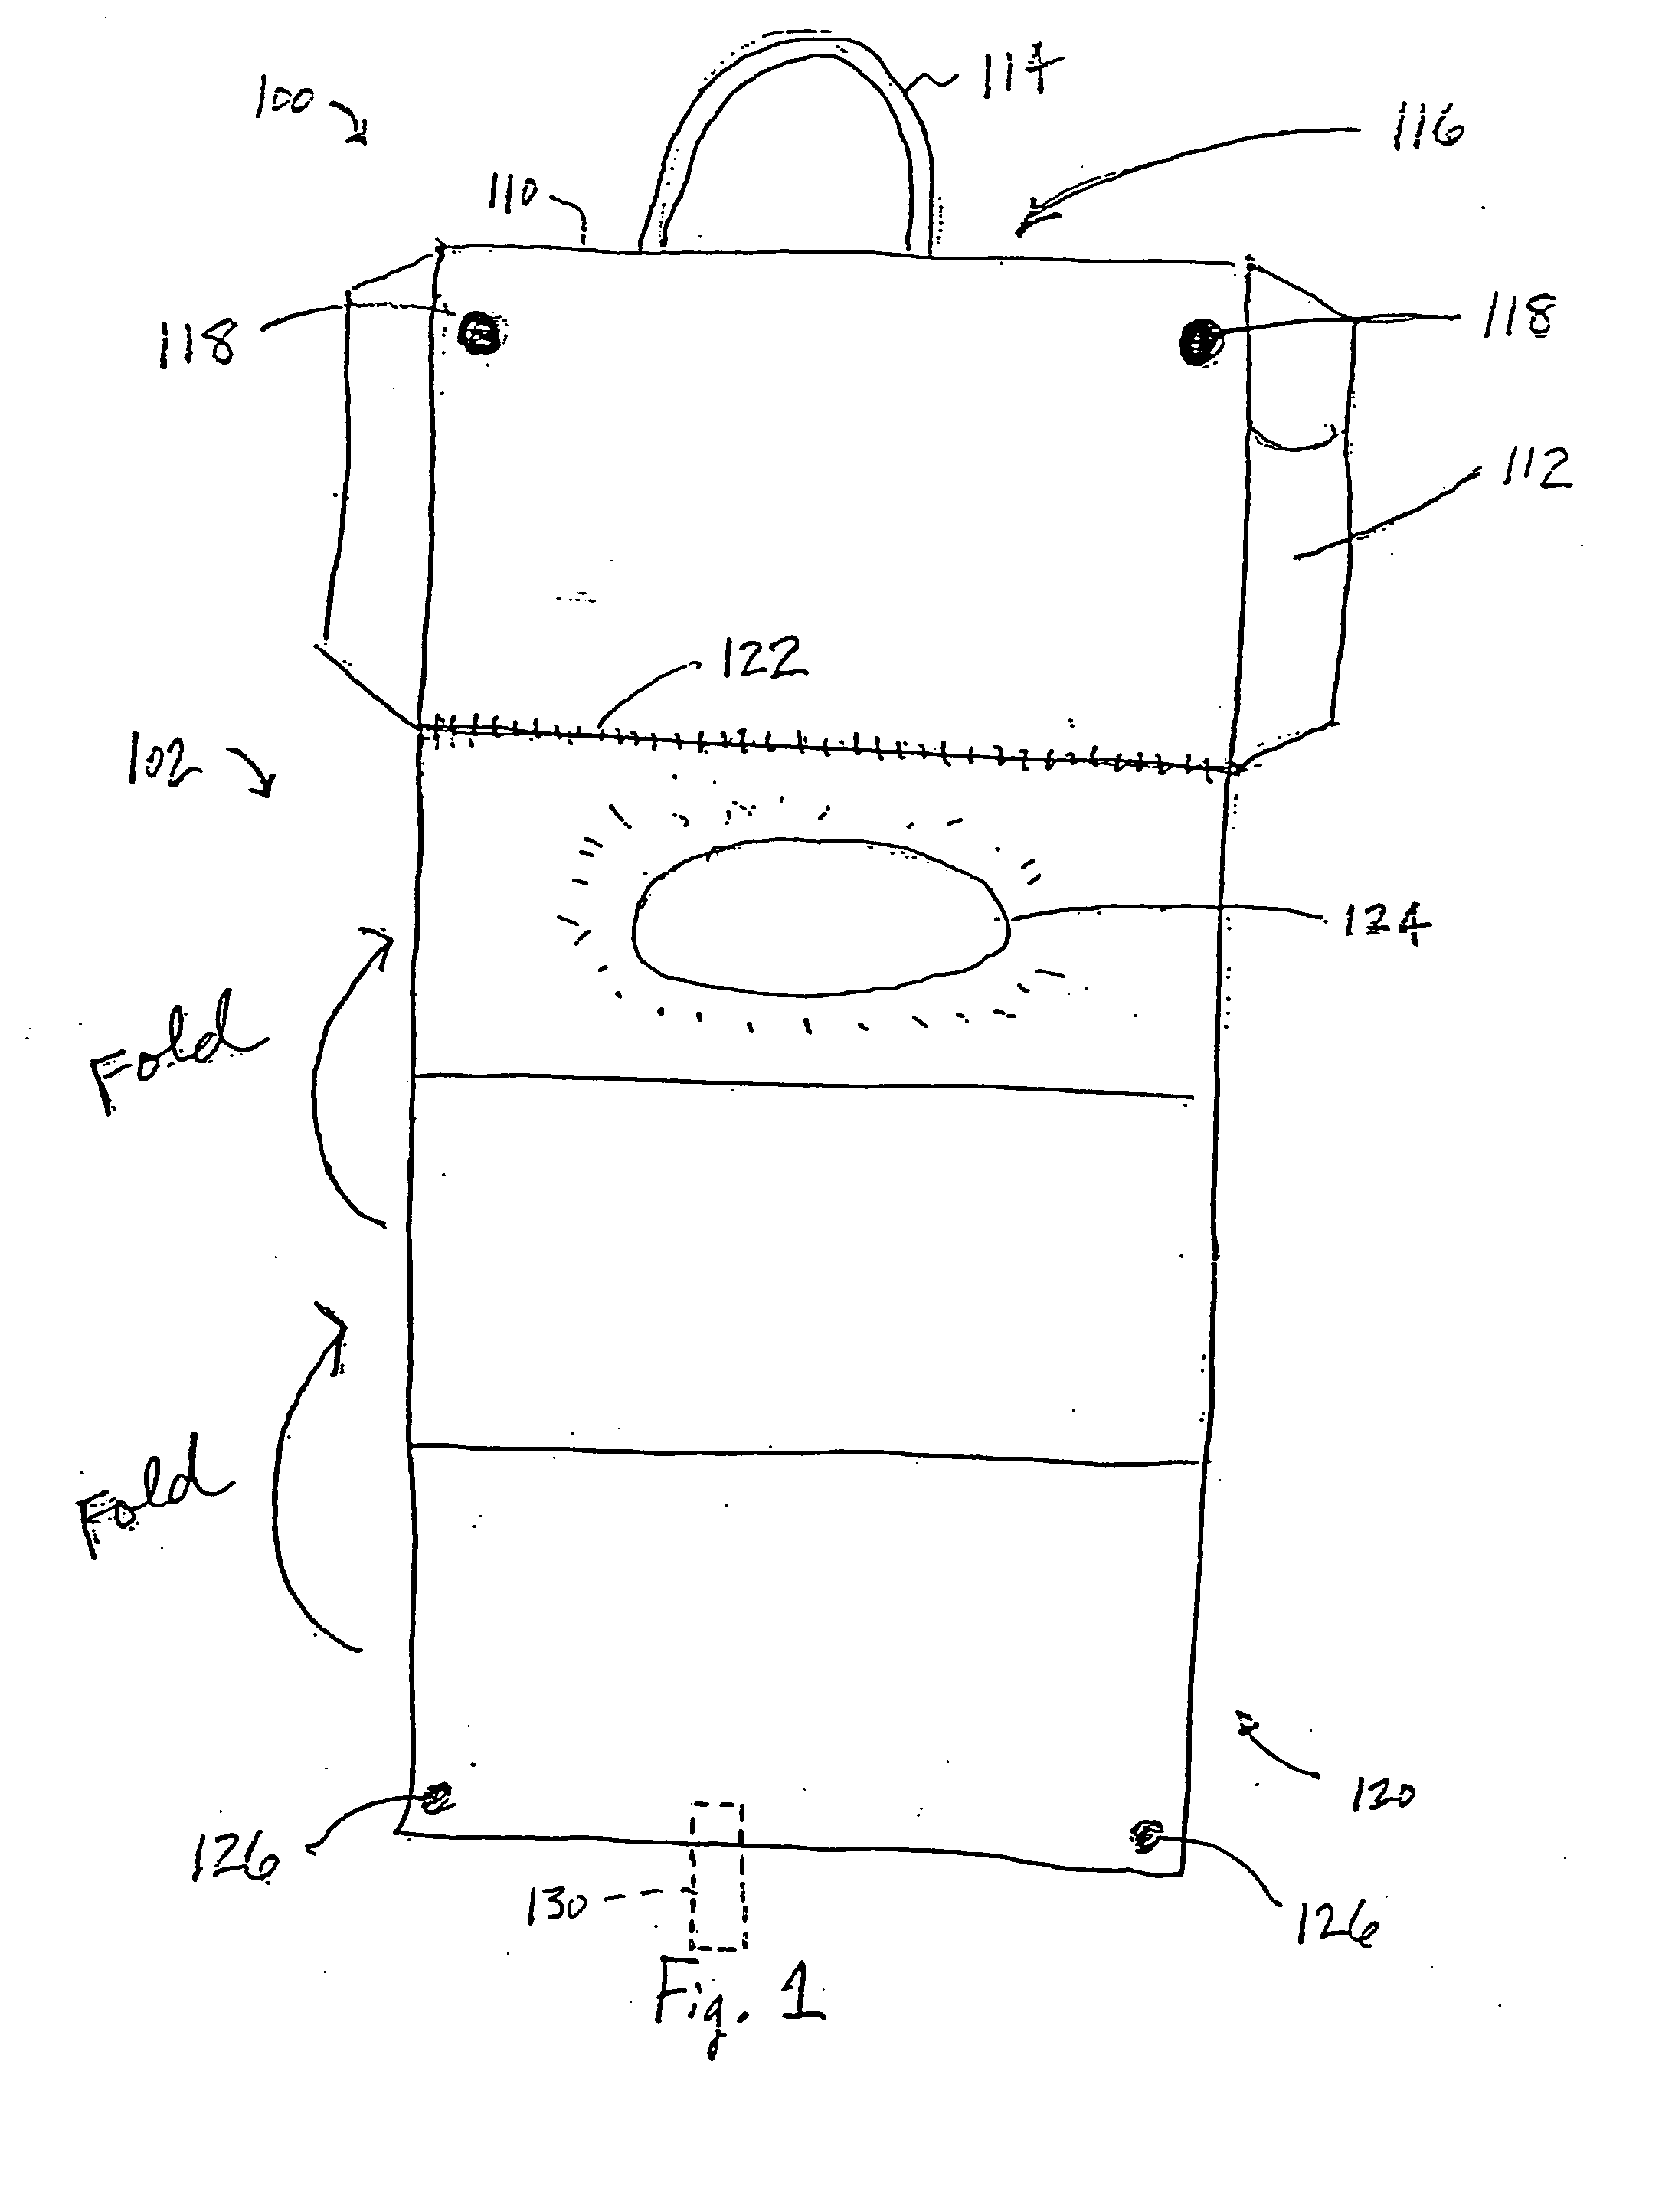 Diaper changing apparatus and methods